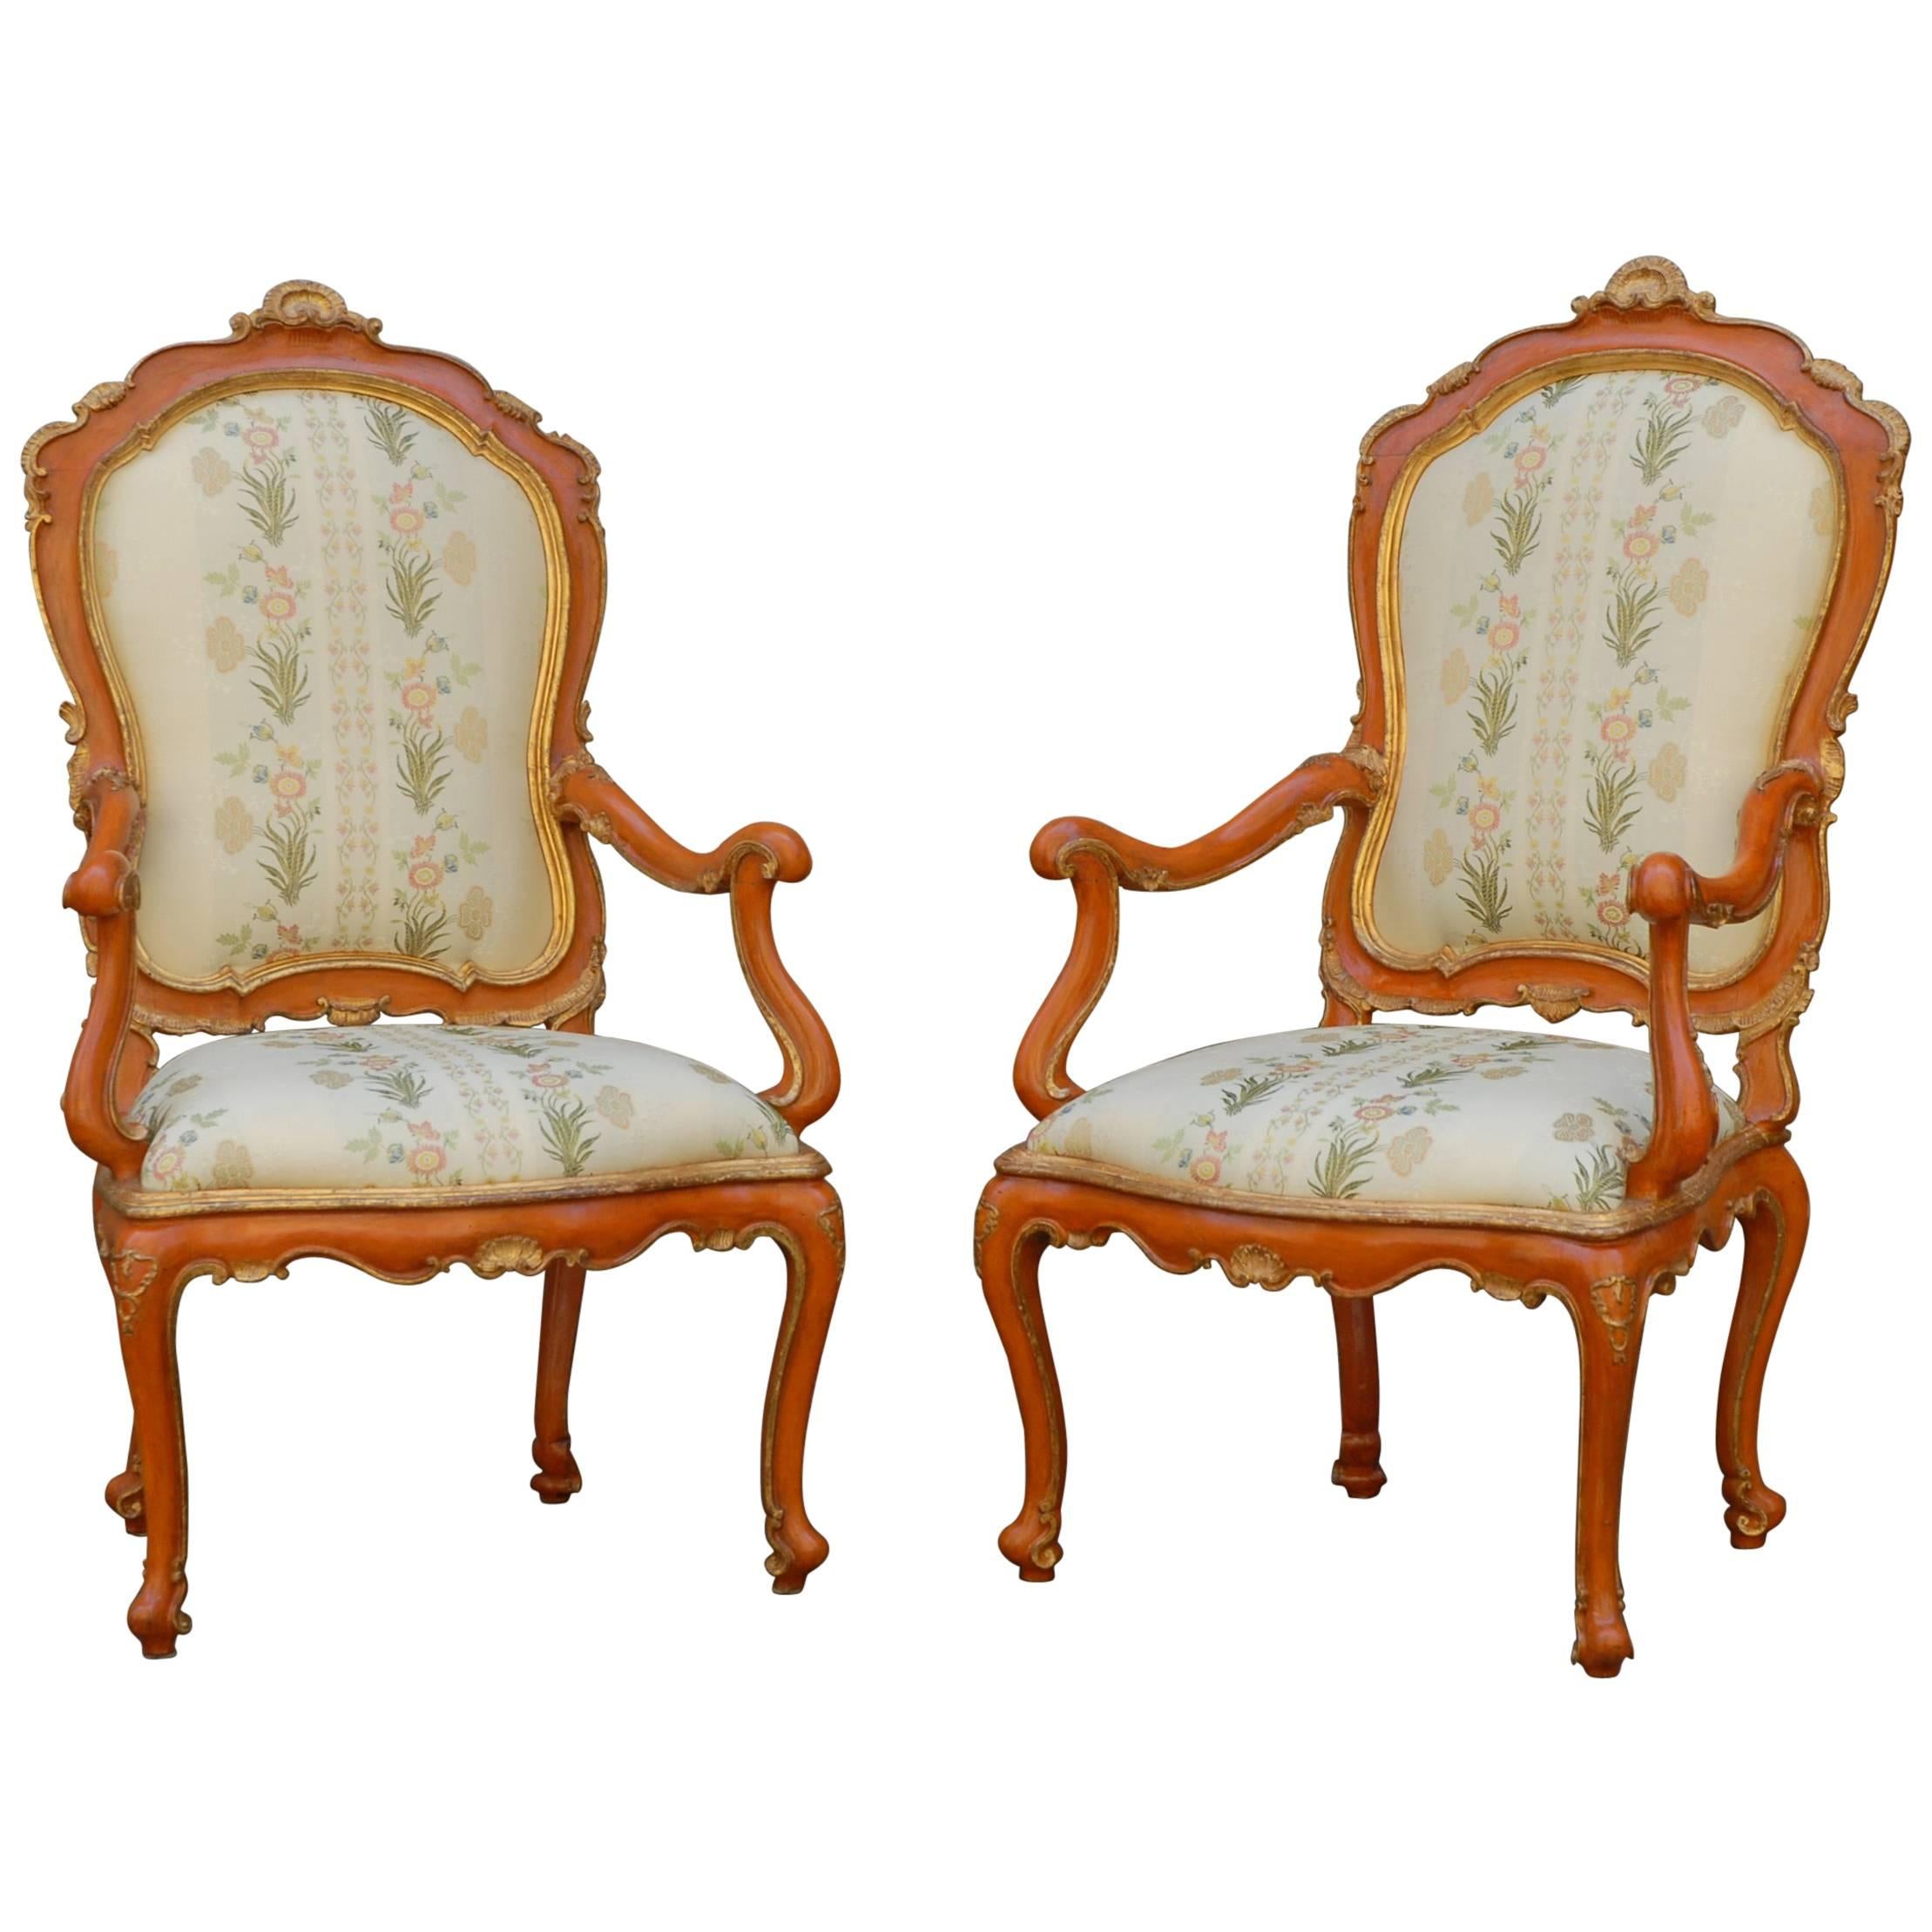 Pair of 18th Century Venetian Armchairs For Sale